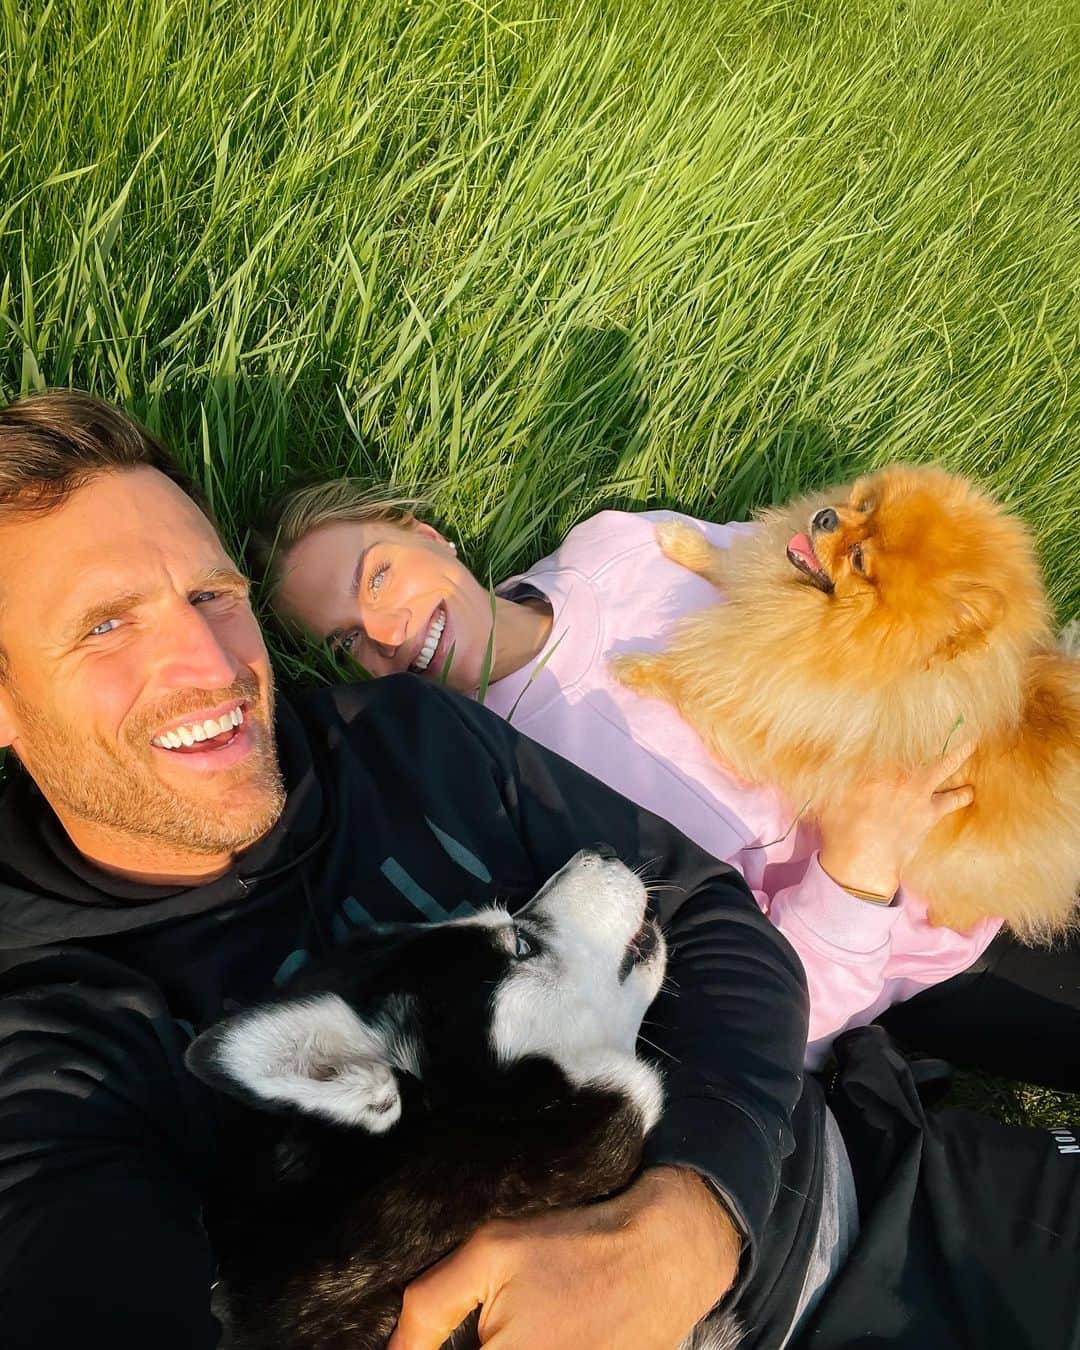 Katrin Tanja Davidsdottirのインスタグラム：「Happy birthday to the brightest light in my life & my favorite person to lay in the grass & just LAUGH with! ☀️🔥😍❤️☺️🫶🏼 It’s the greatest gift that I get to do life with you, @brookslaich !!   I am so excited to see what this decade brings for you: The best is yet to come my love - happy 40th!! (It looks REAL good on you 😮‍💨😏) Thank you for being you & for all that you embody - I love you with all my heart ❤️ &&& so do our bestest boys 🐺🦁🤭 xxx」